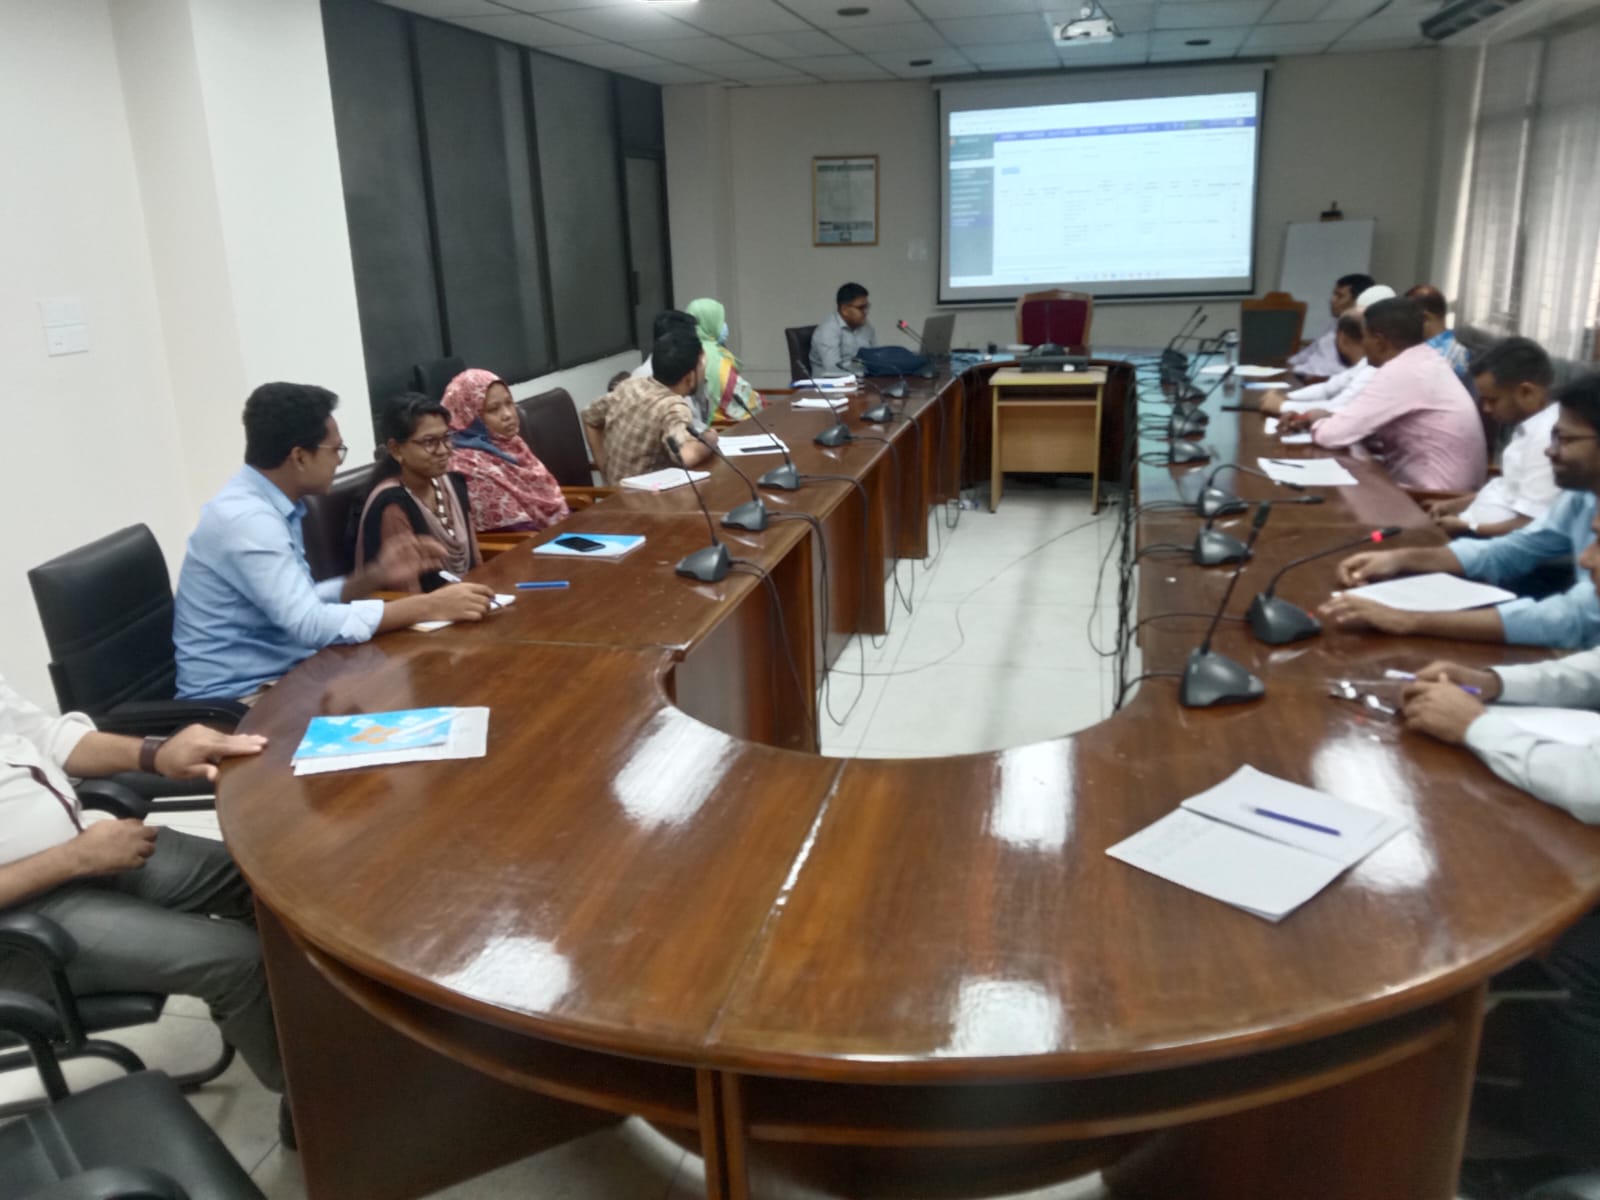 Mission audit Directorate conducts the two-days training session highlighting AMMS 2.0.Now the 2nd day's session is going on.